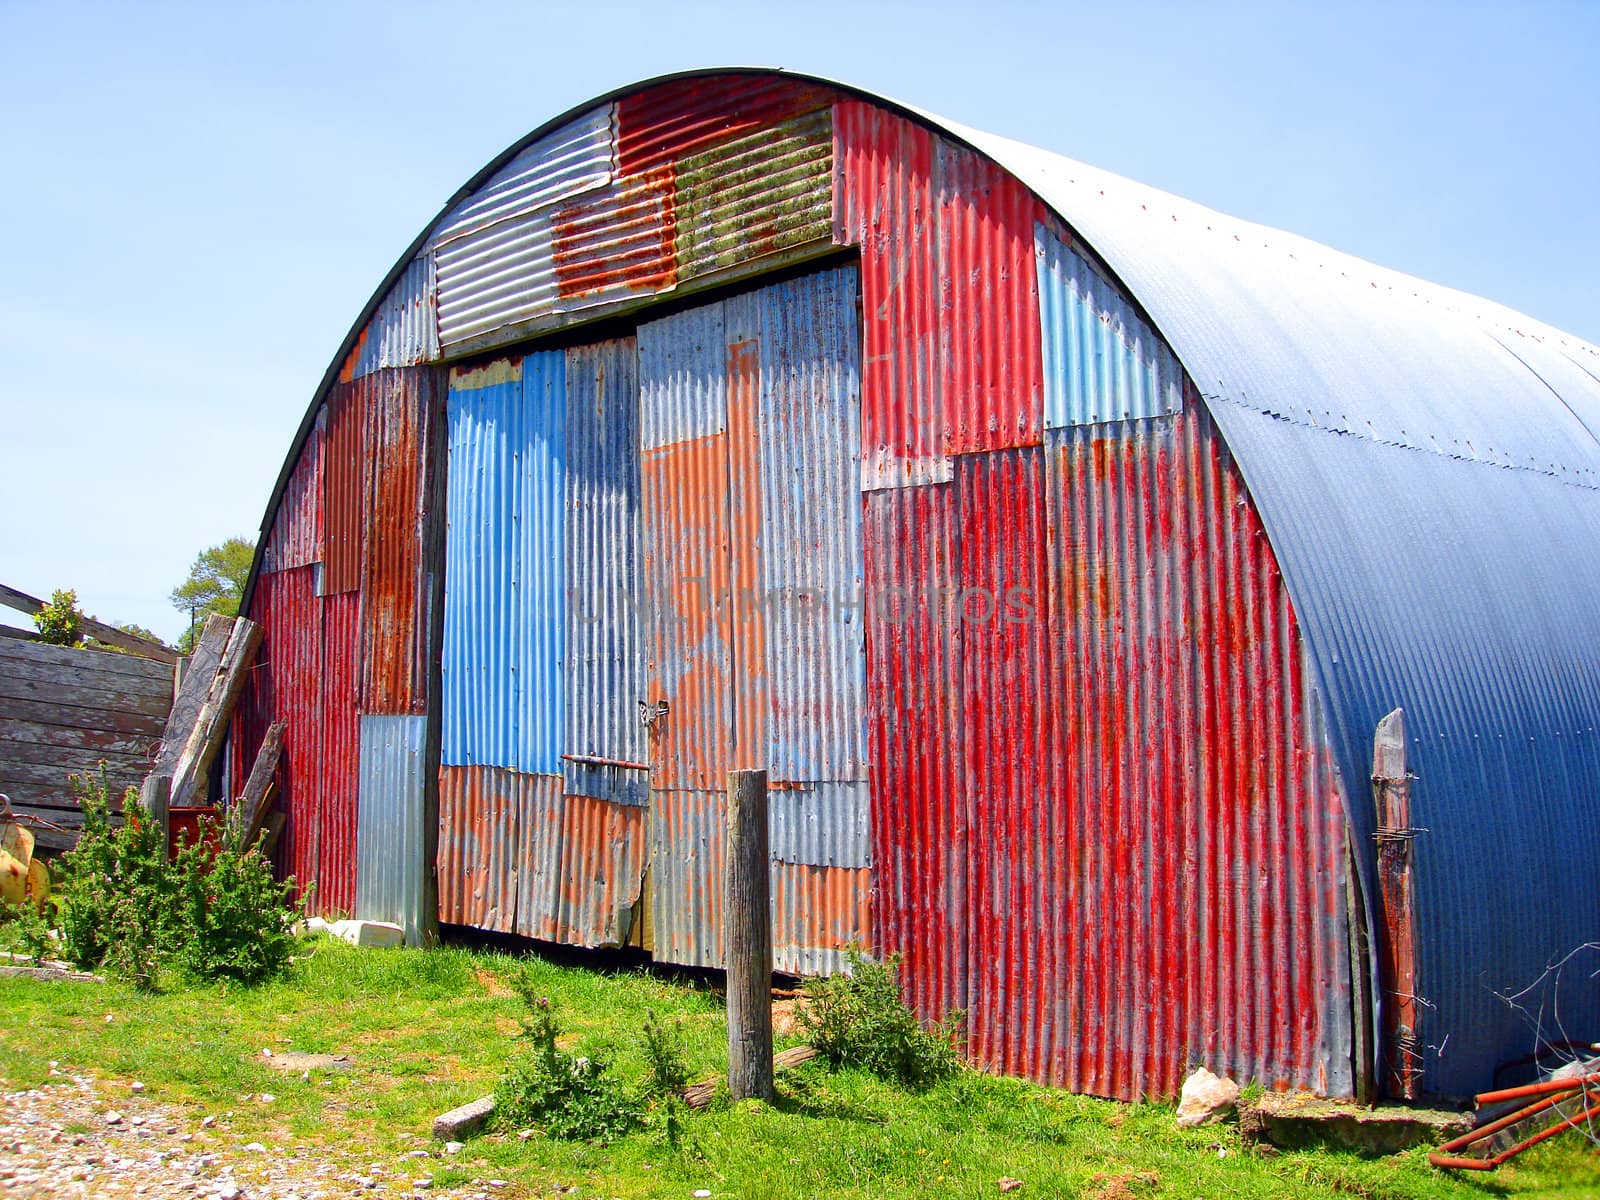 Round Metal Shed on Farm with Mismatched Paint on front surface. by Cloudia